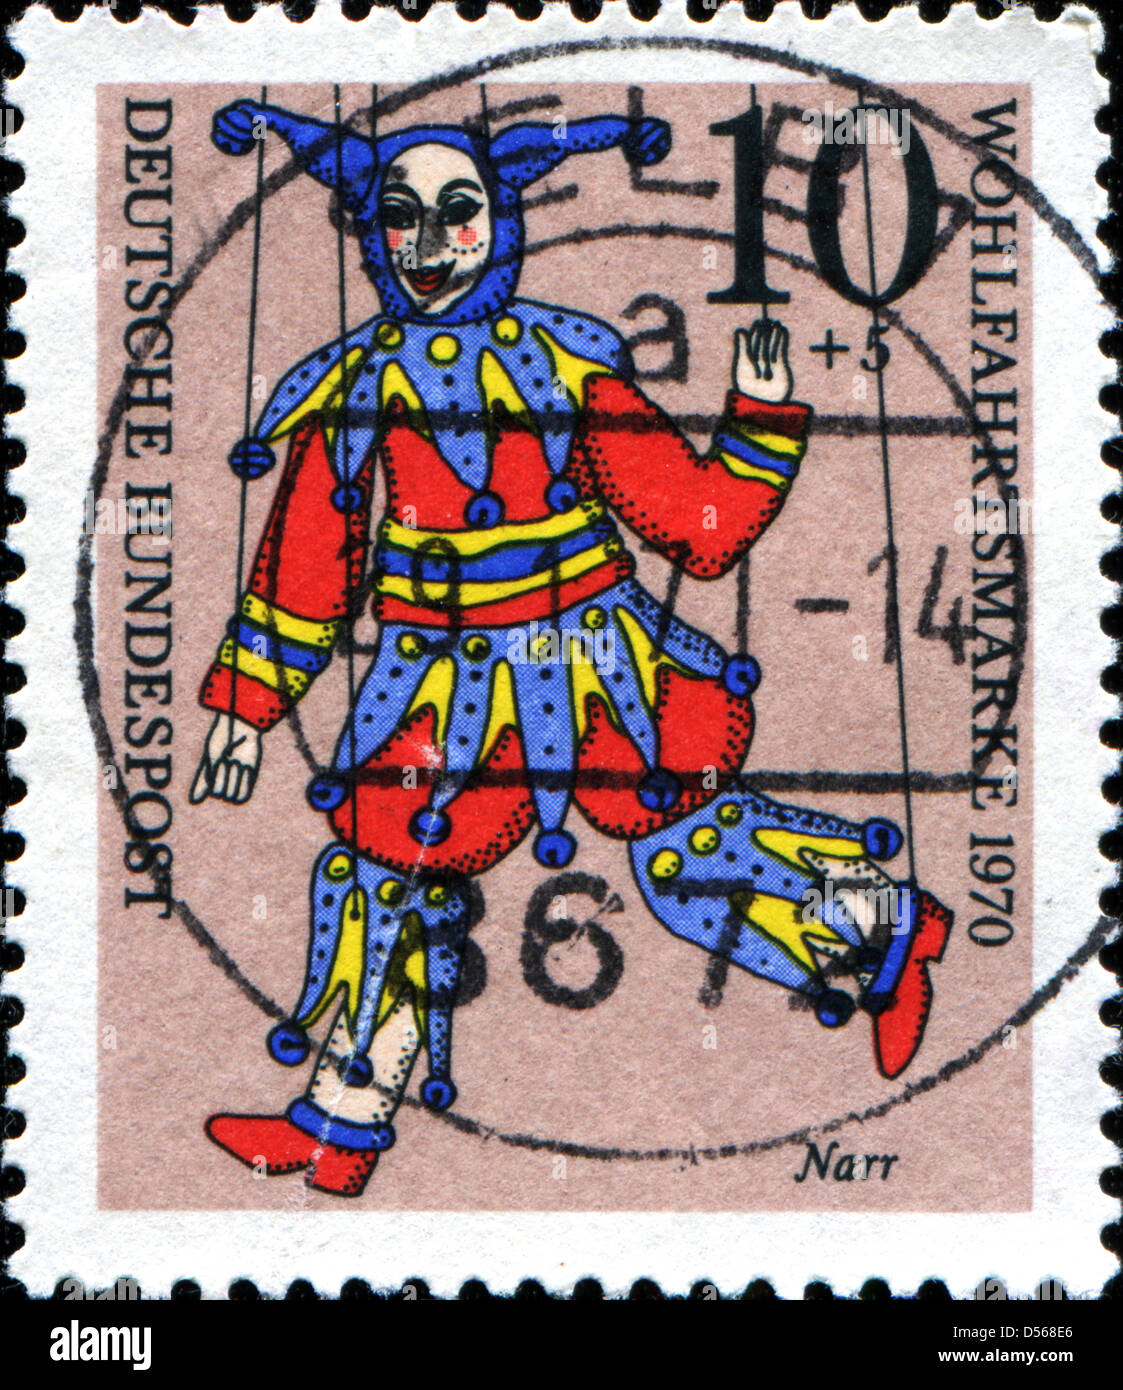 GERMANY - CIRCA 1970: A stamp printed in German Federal Republic shows Jester, circa 1970  Stock Photo